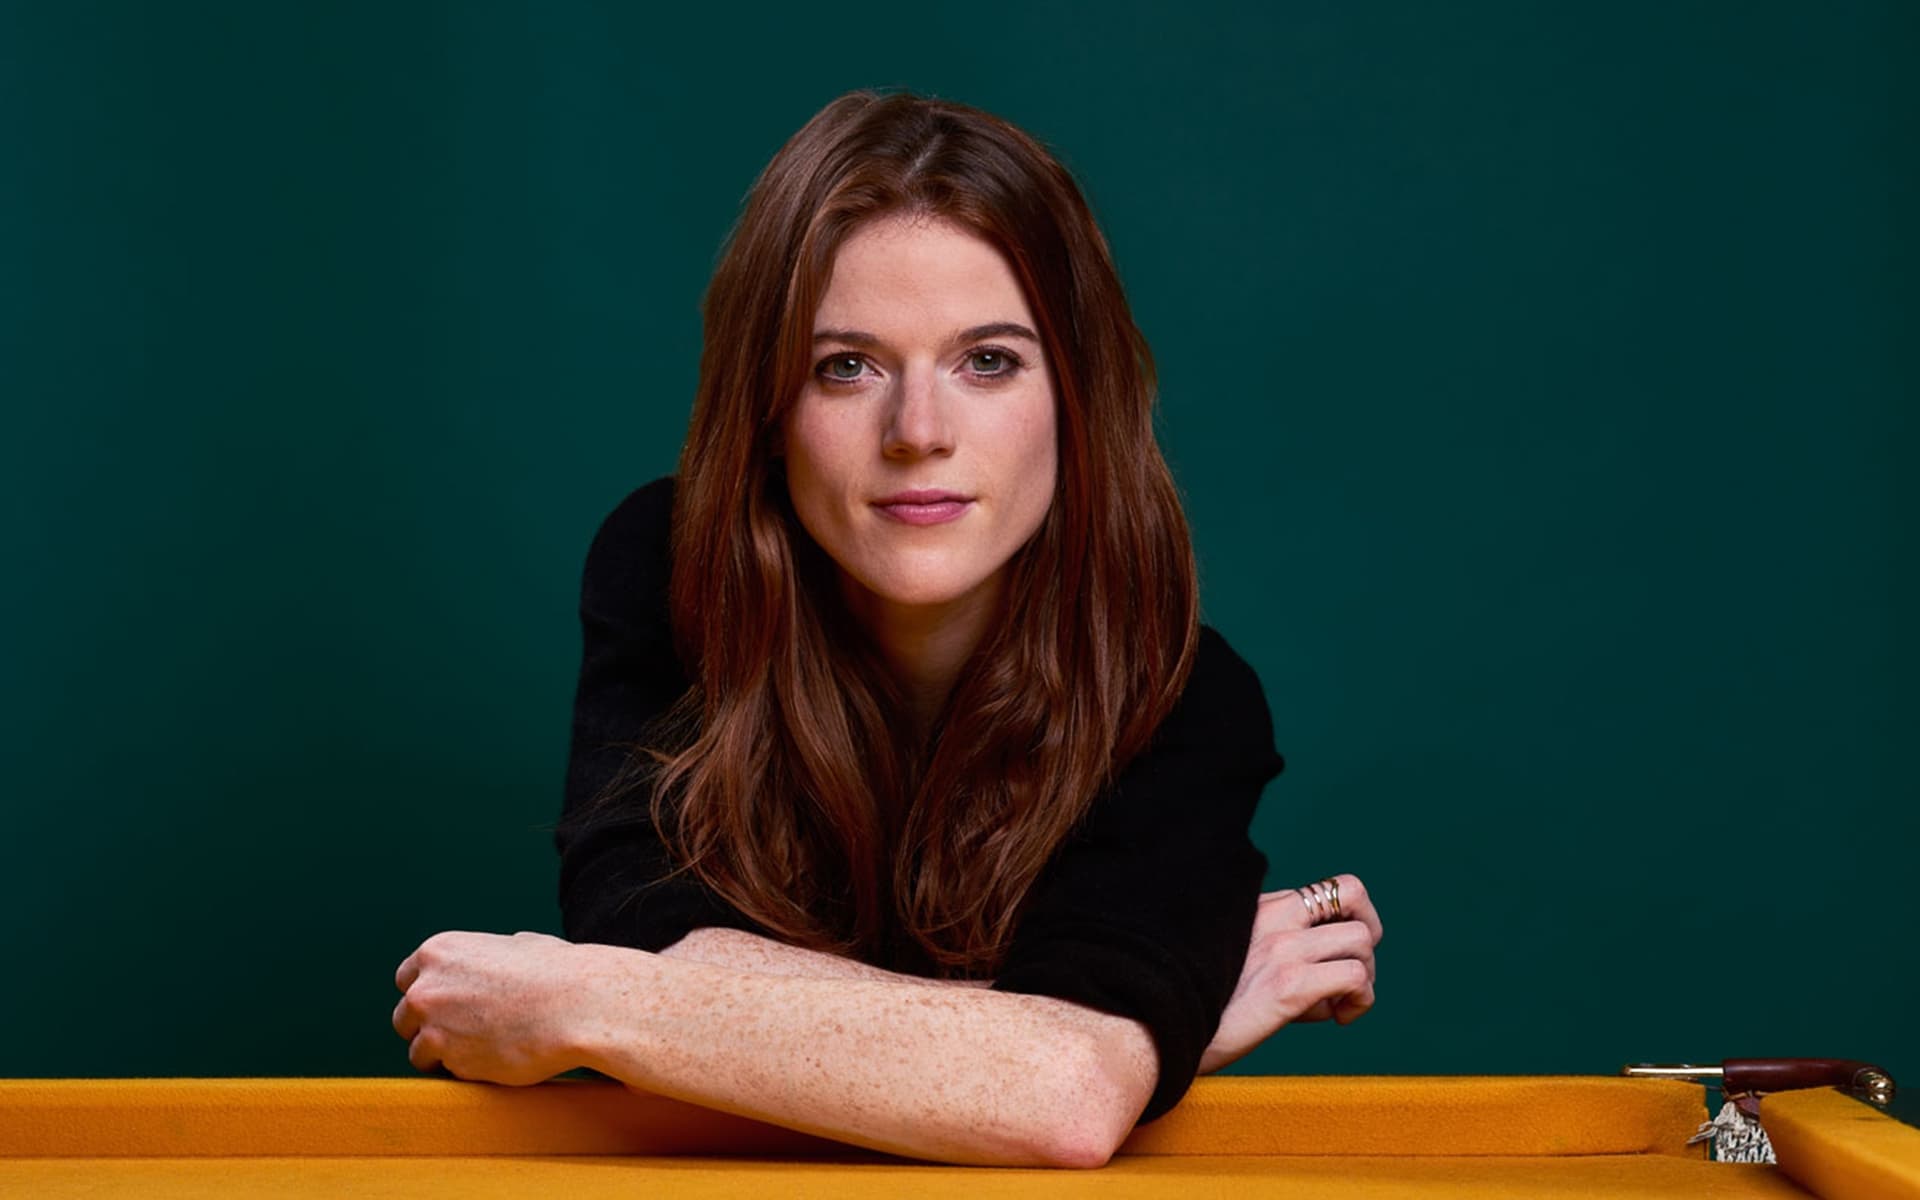 5 Rose Leslie Wallpapers High Quality Download - Rose Leslie Hot Wallpapers 1080p , HD Wallpaper & Backgrounds